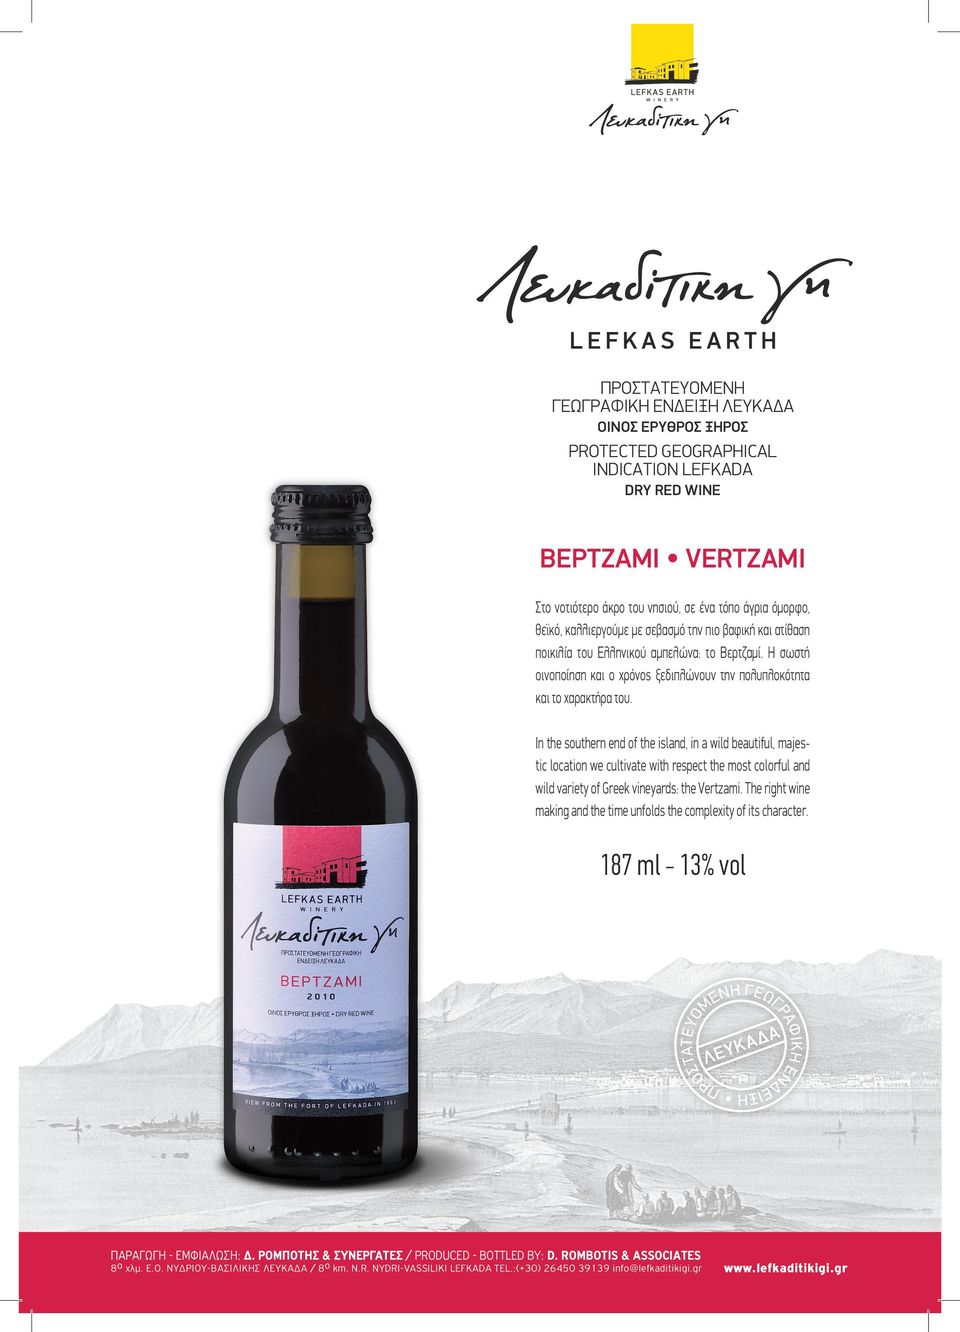 In the southern end of the island, in a wild beautiful, majestic location we cultivate with respect the most colorful and wild variety of Greek vineyards: the Vertzami.